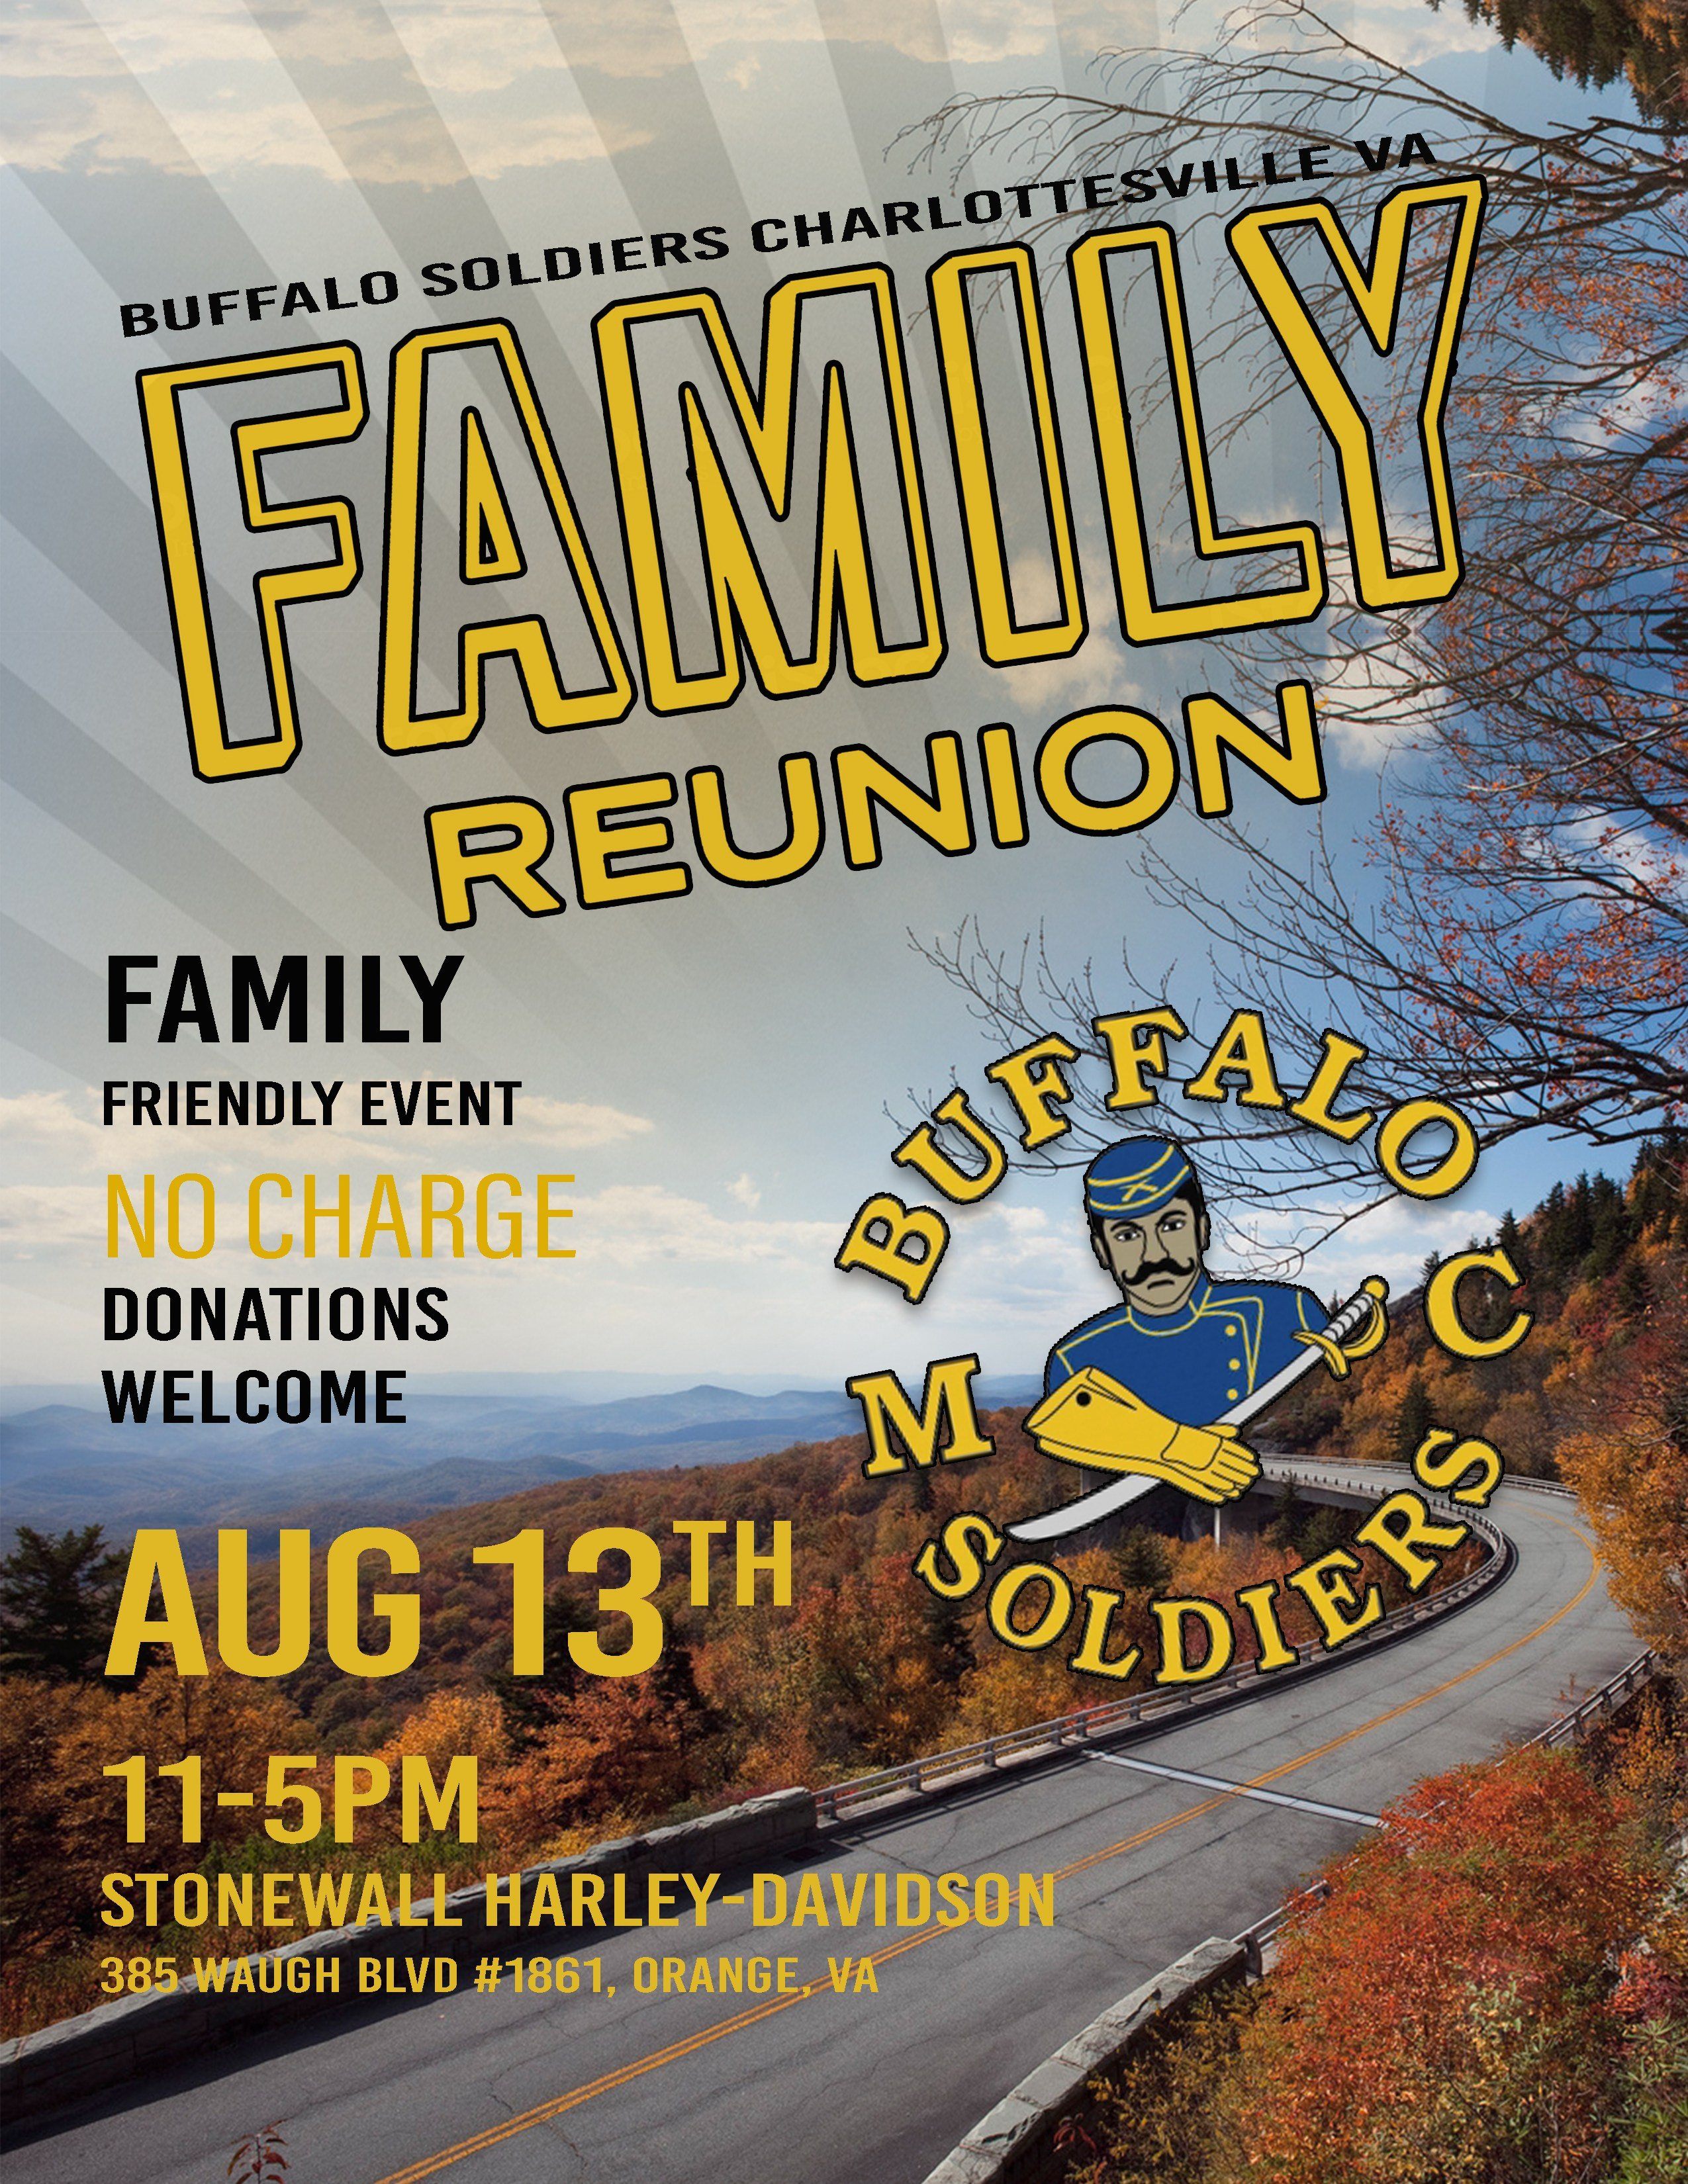 BUFFALO SOLDIERS CHARLOTTESVILLE FAMILY REUNION EVENT AT STONEWALL HD